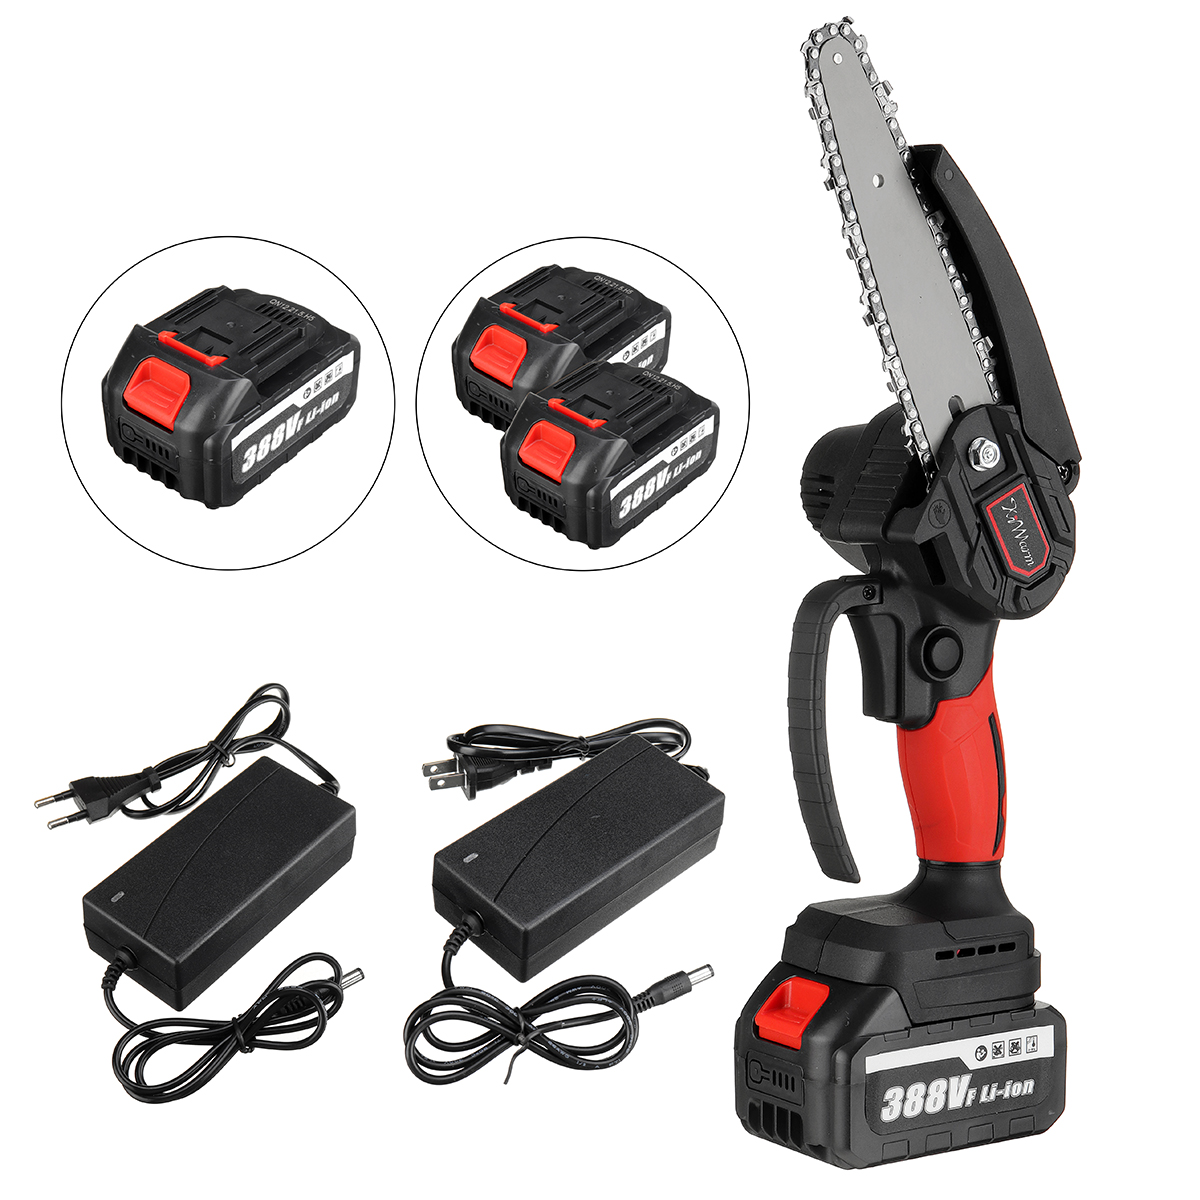 388VF-3000W-Cordless-Brushless-6Inch-Electric-Chain-Saw-Chainsaw-Firewood-Cutting-with-Battery-1954233-6